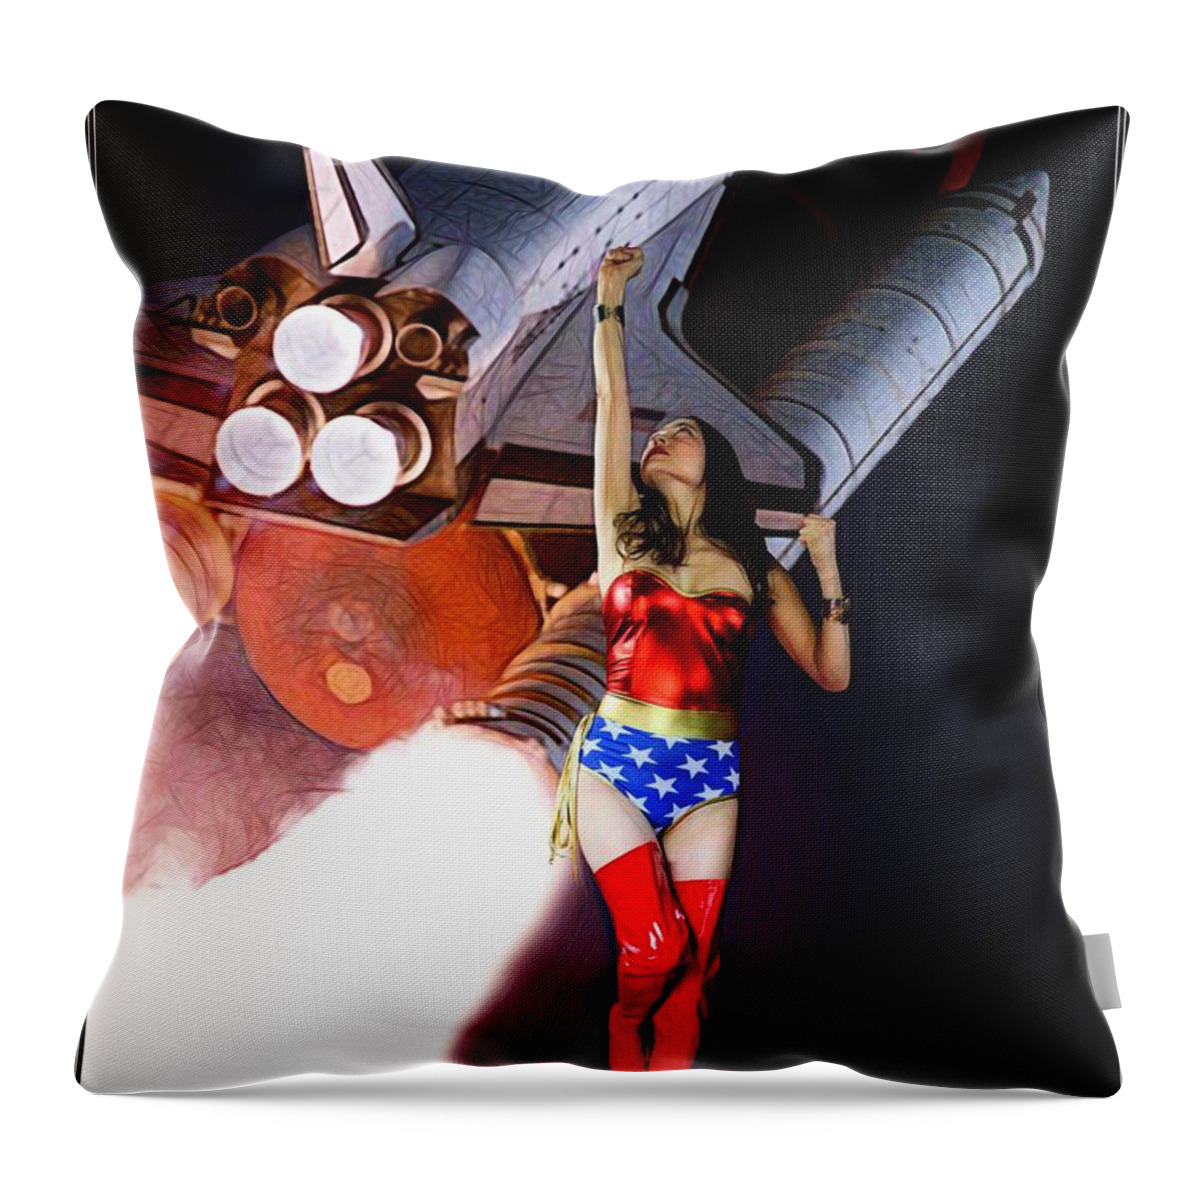 Fantasy Throw Pillow featuring the painting USA in Space by Jon Volden